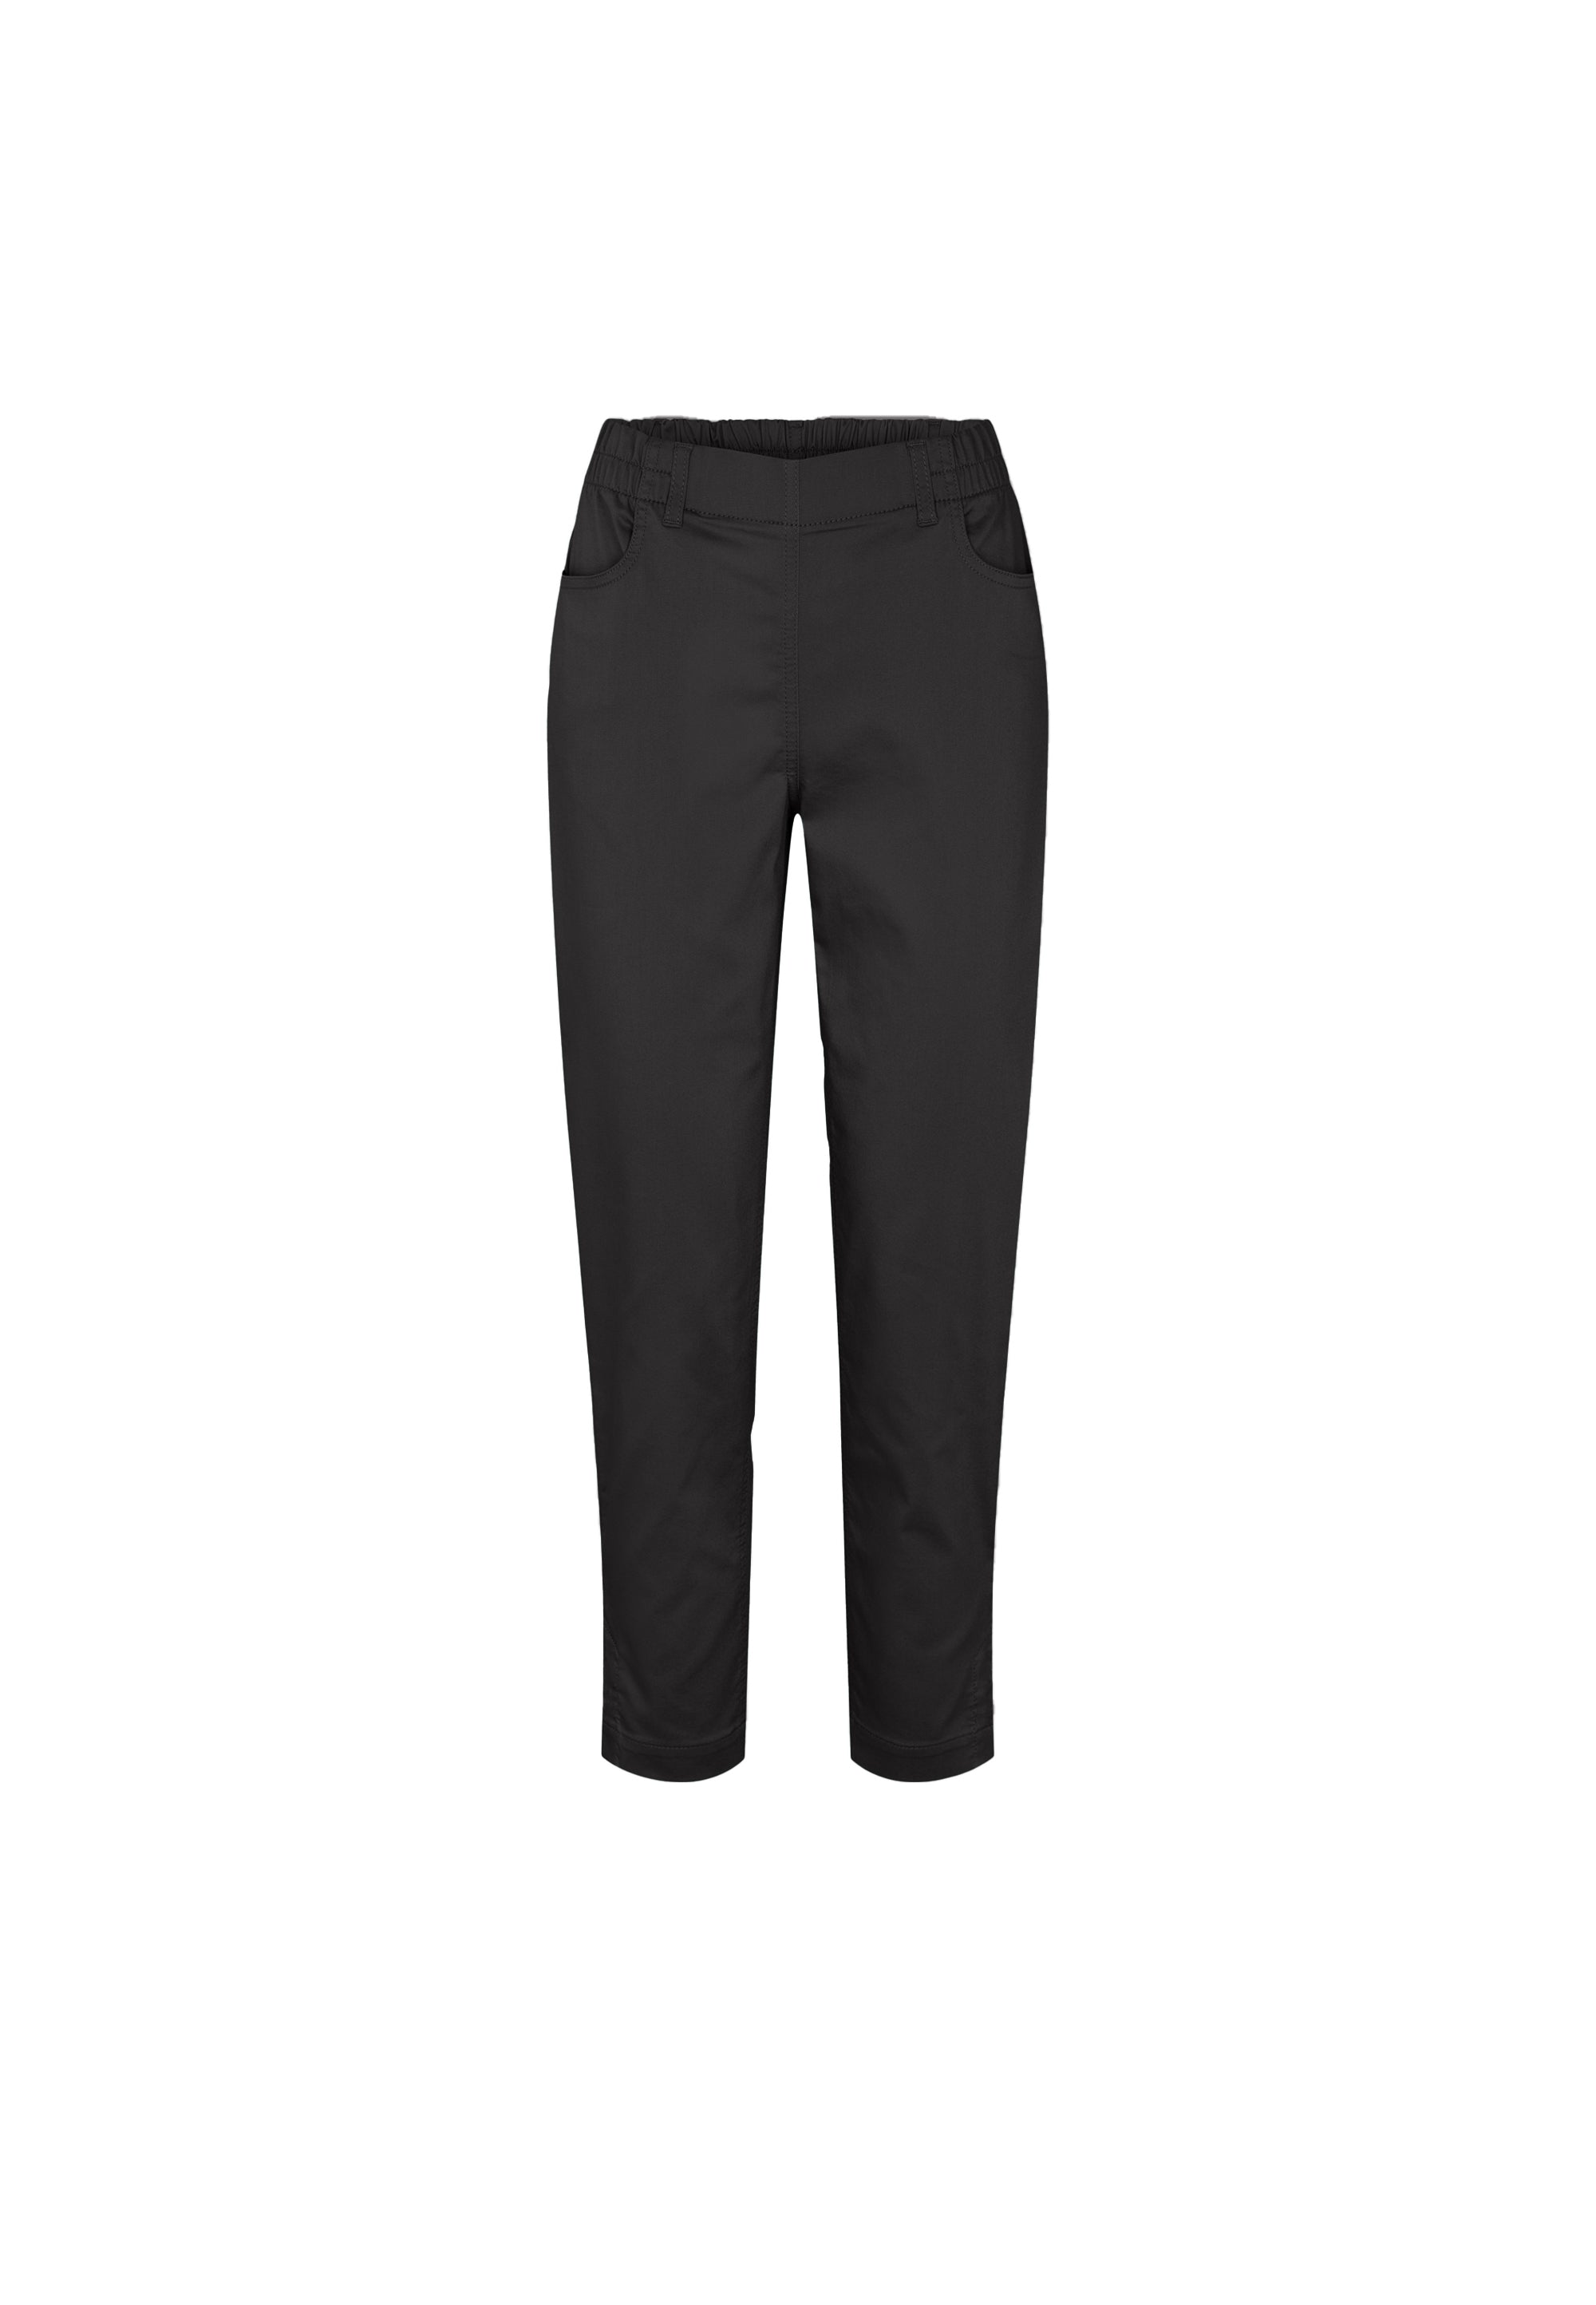 LAURIE Ellie Relaxed - Extra Short Length Trousers RELAXED 99000 Black